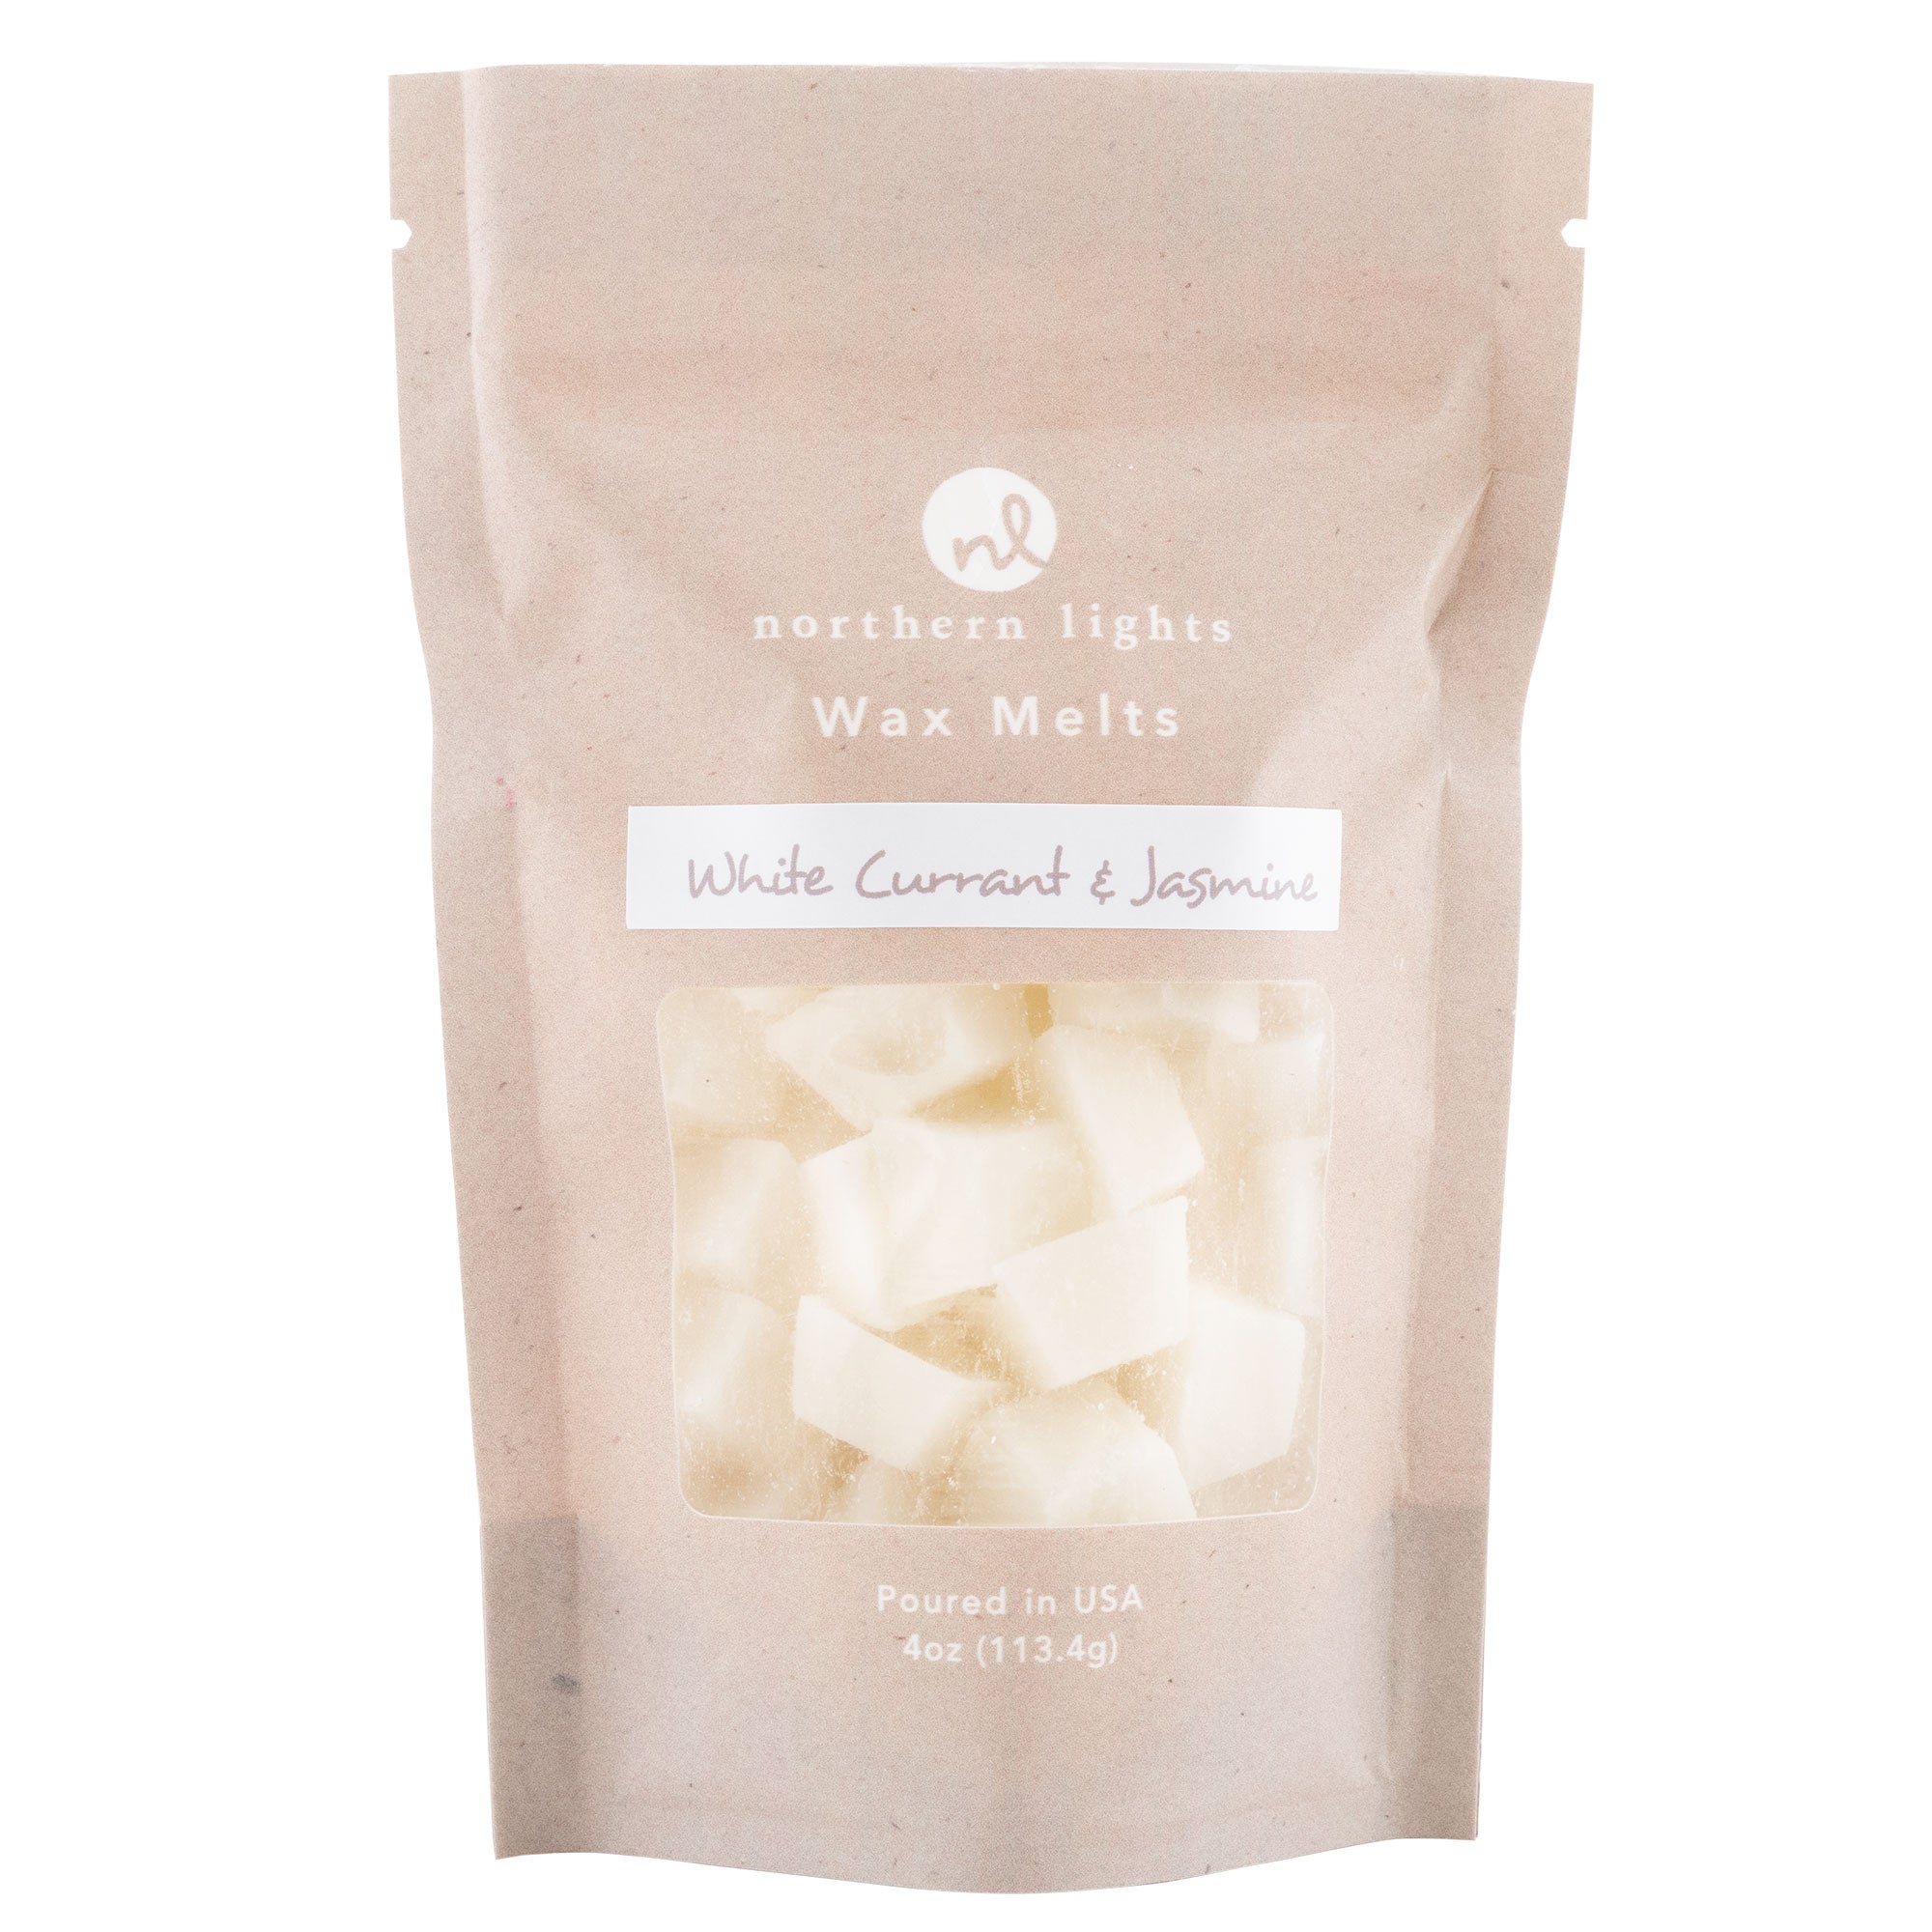 White Current & Jasmine by Northern Lights Wax Melts Pouch 4 oz